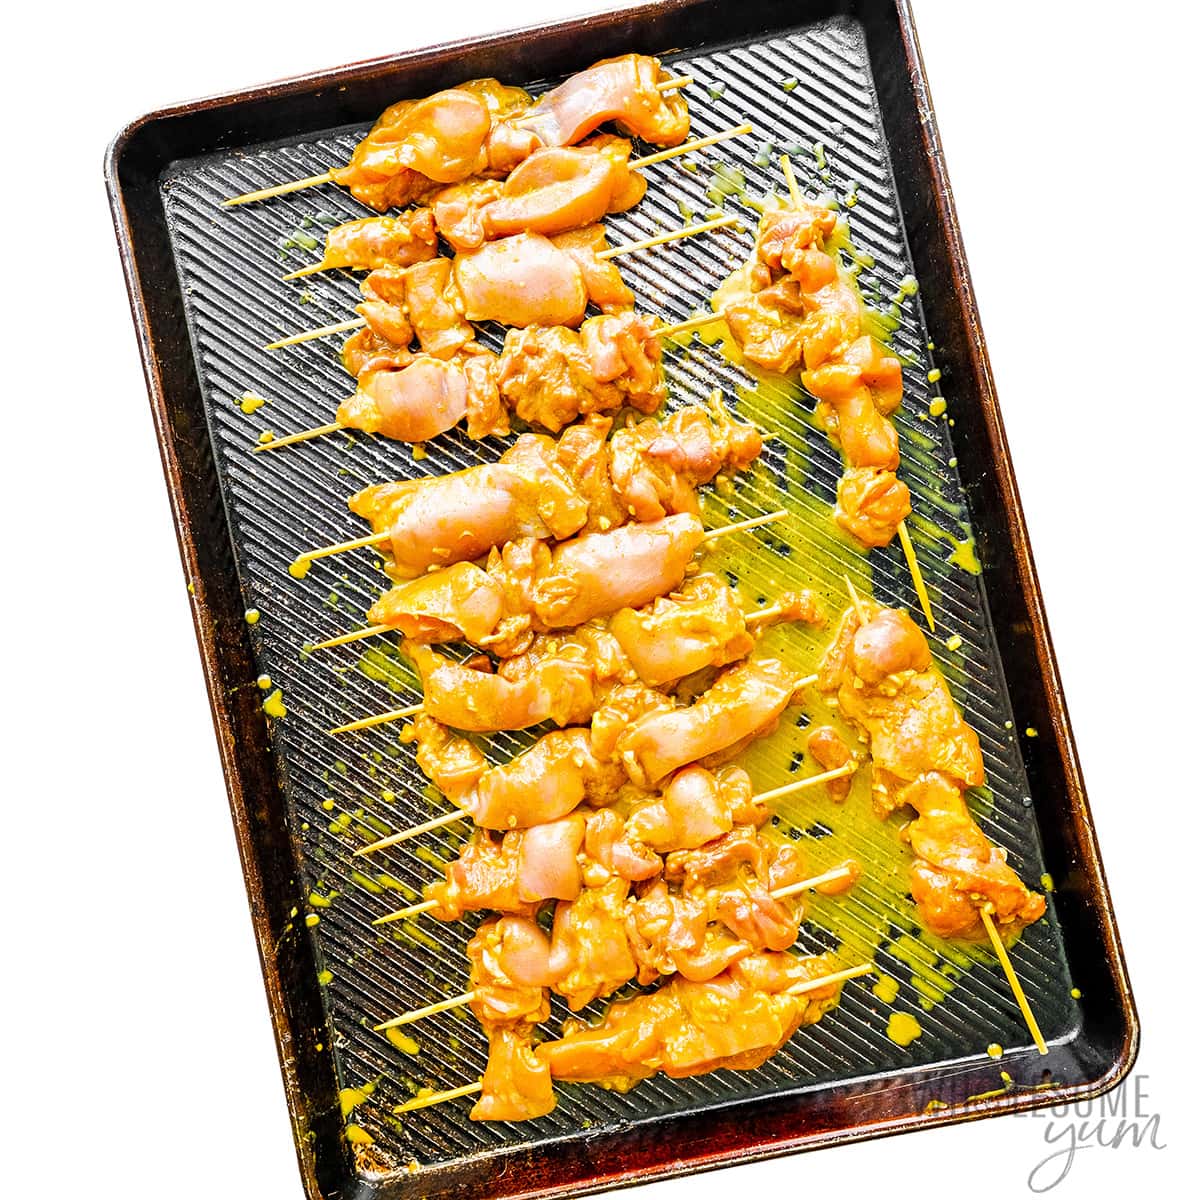 Marinated chicken placed on skewers on a baking sheet.